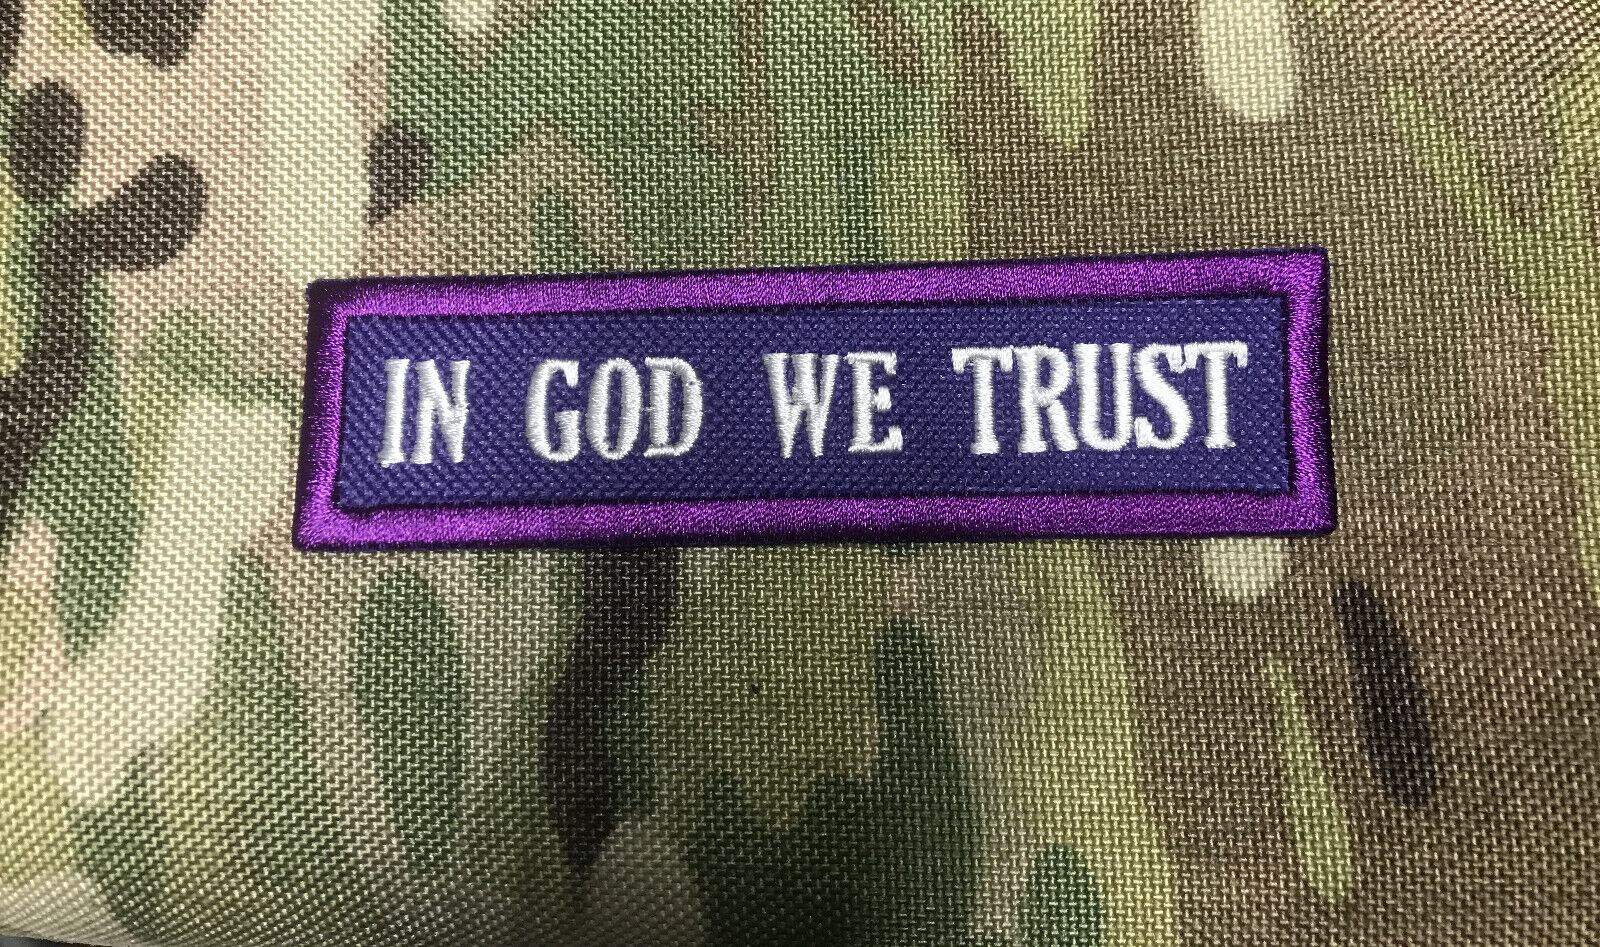 IN GOD WE TRUST EMB PATCH 1X4\'\' SEW ON WHITE ON PURPLE